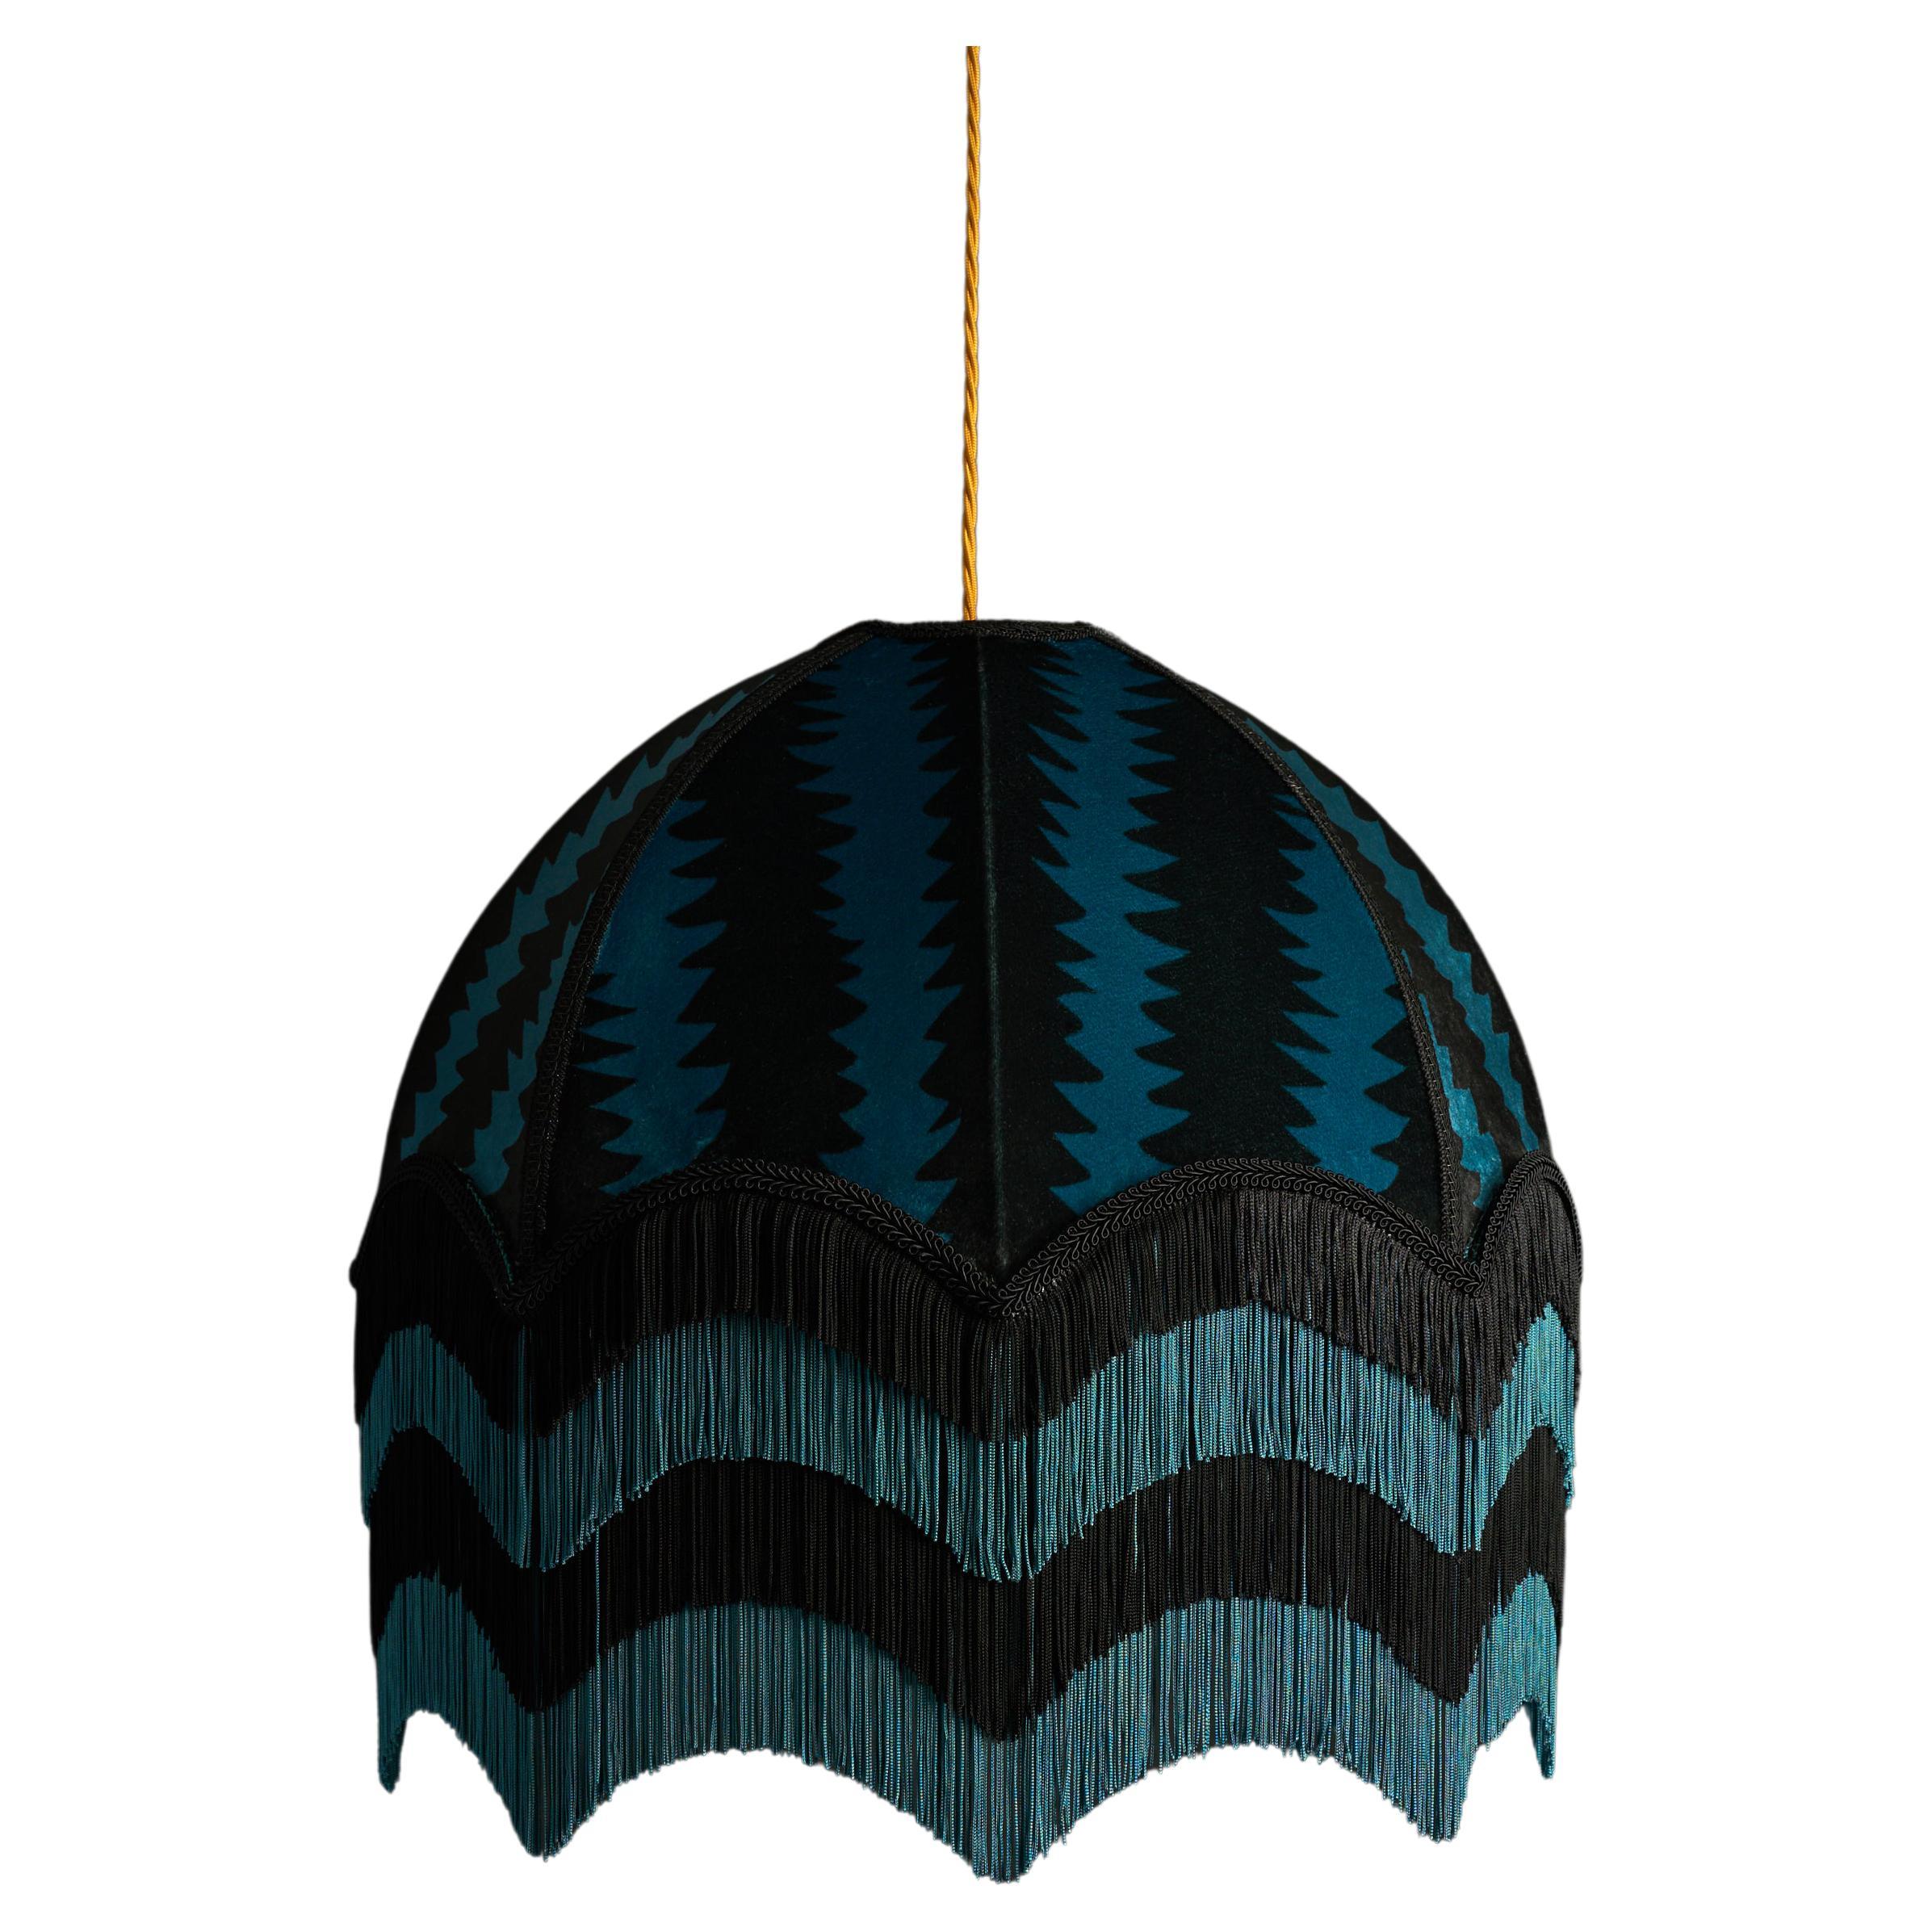 Fitz Lampshade with Fringing - Small (14")